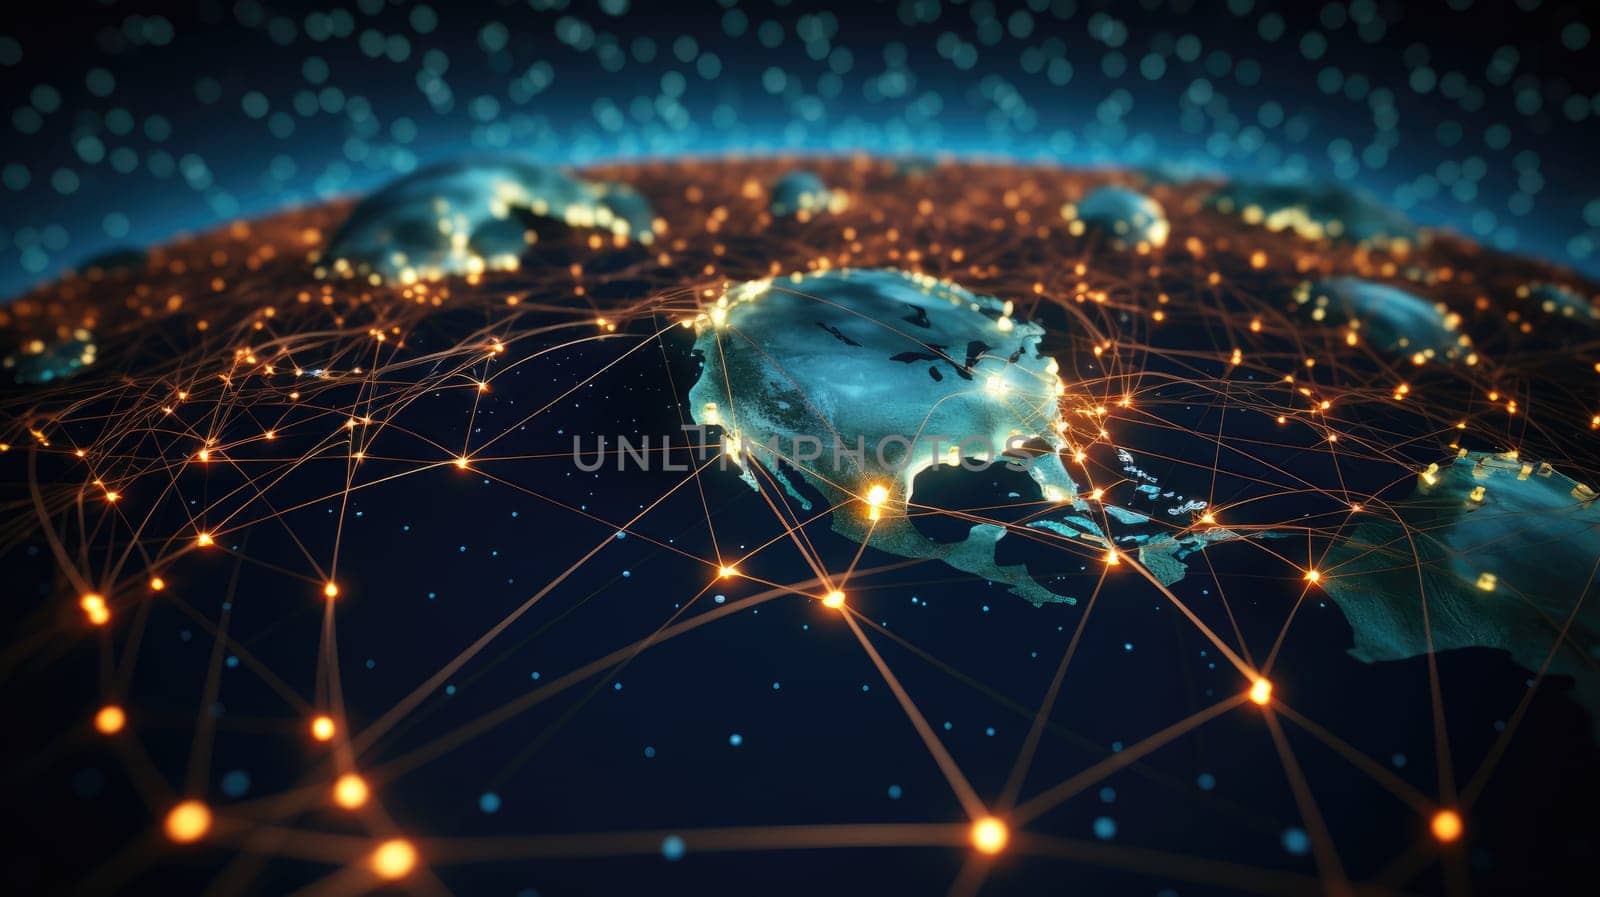 Communication technology with connections around globe Earth showing concept of Internet, IoT, cyberspace, global business, innovation, big data science, digital finance, blockchain.